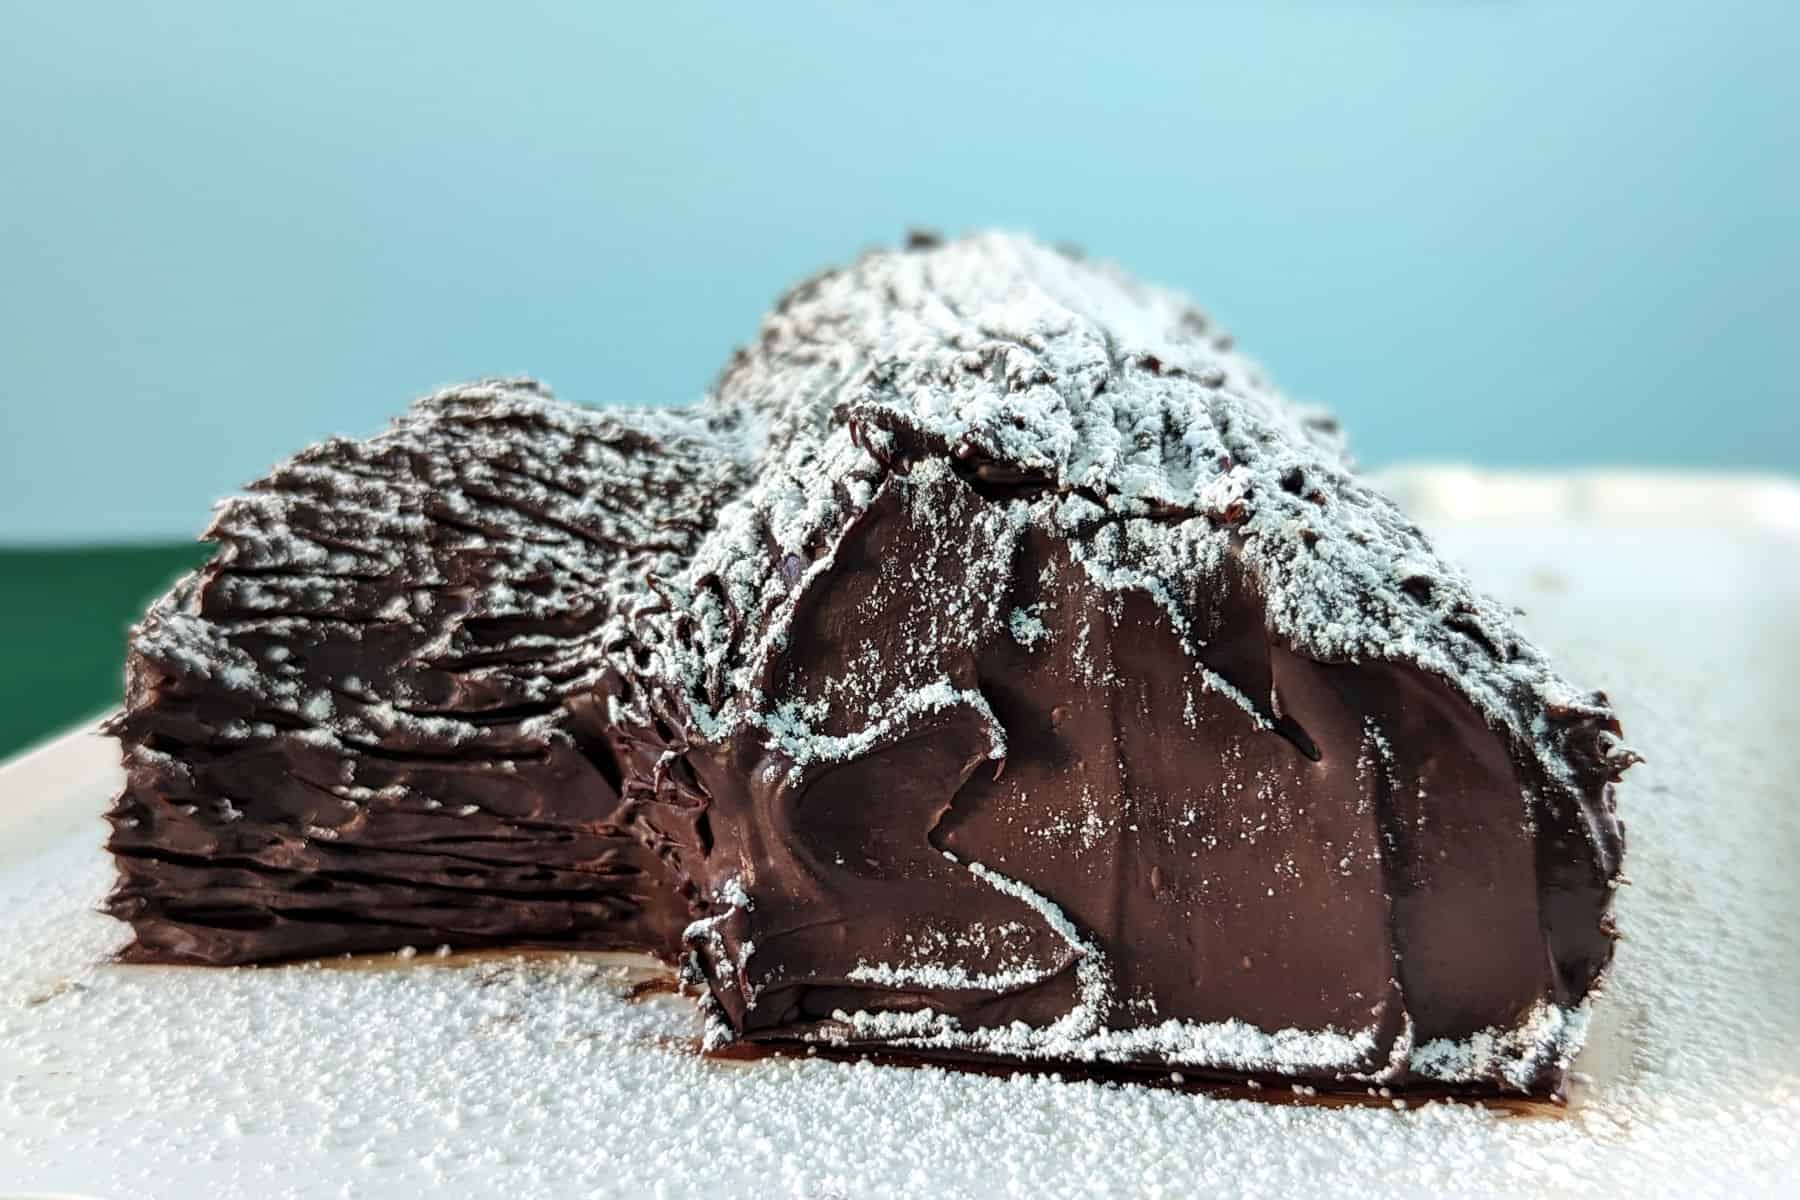 flourless chocolate yule log, dusted with powdered sugar snow